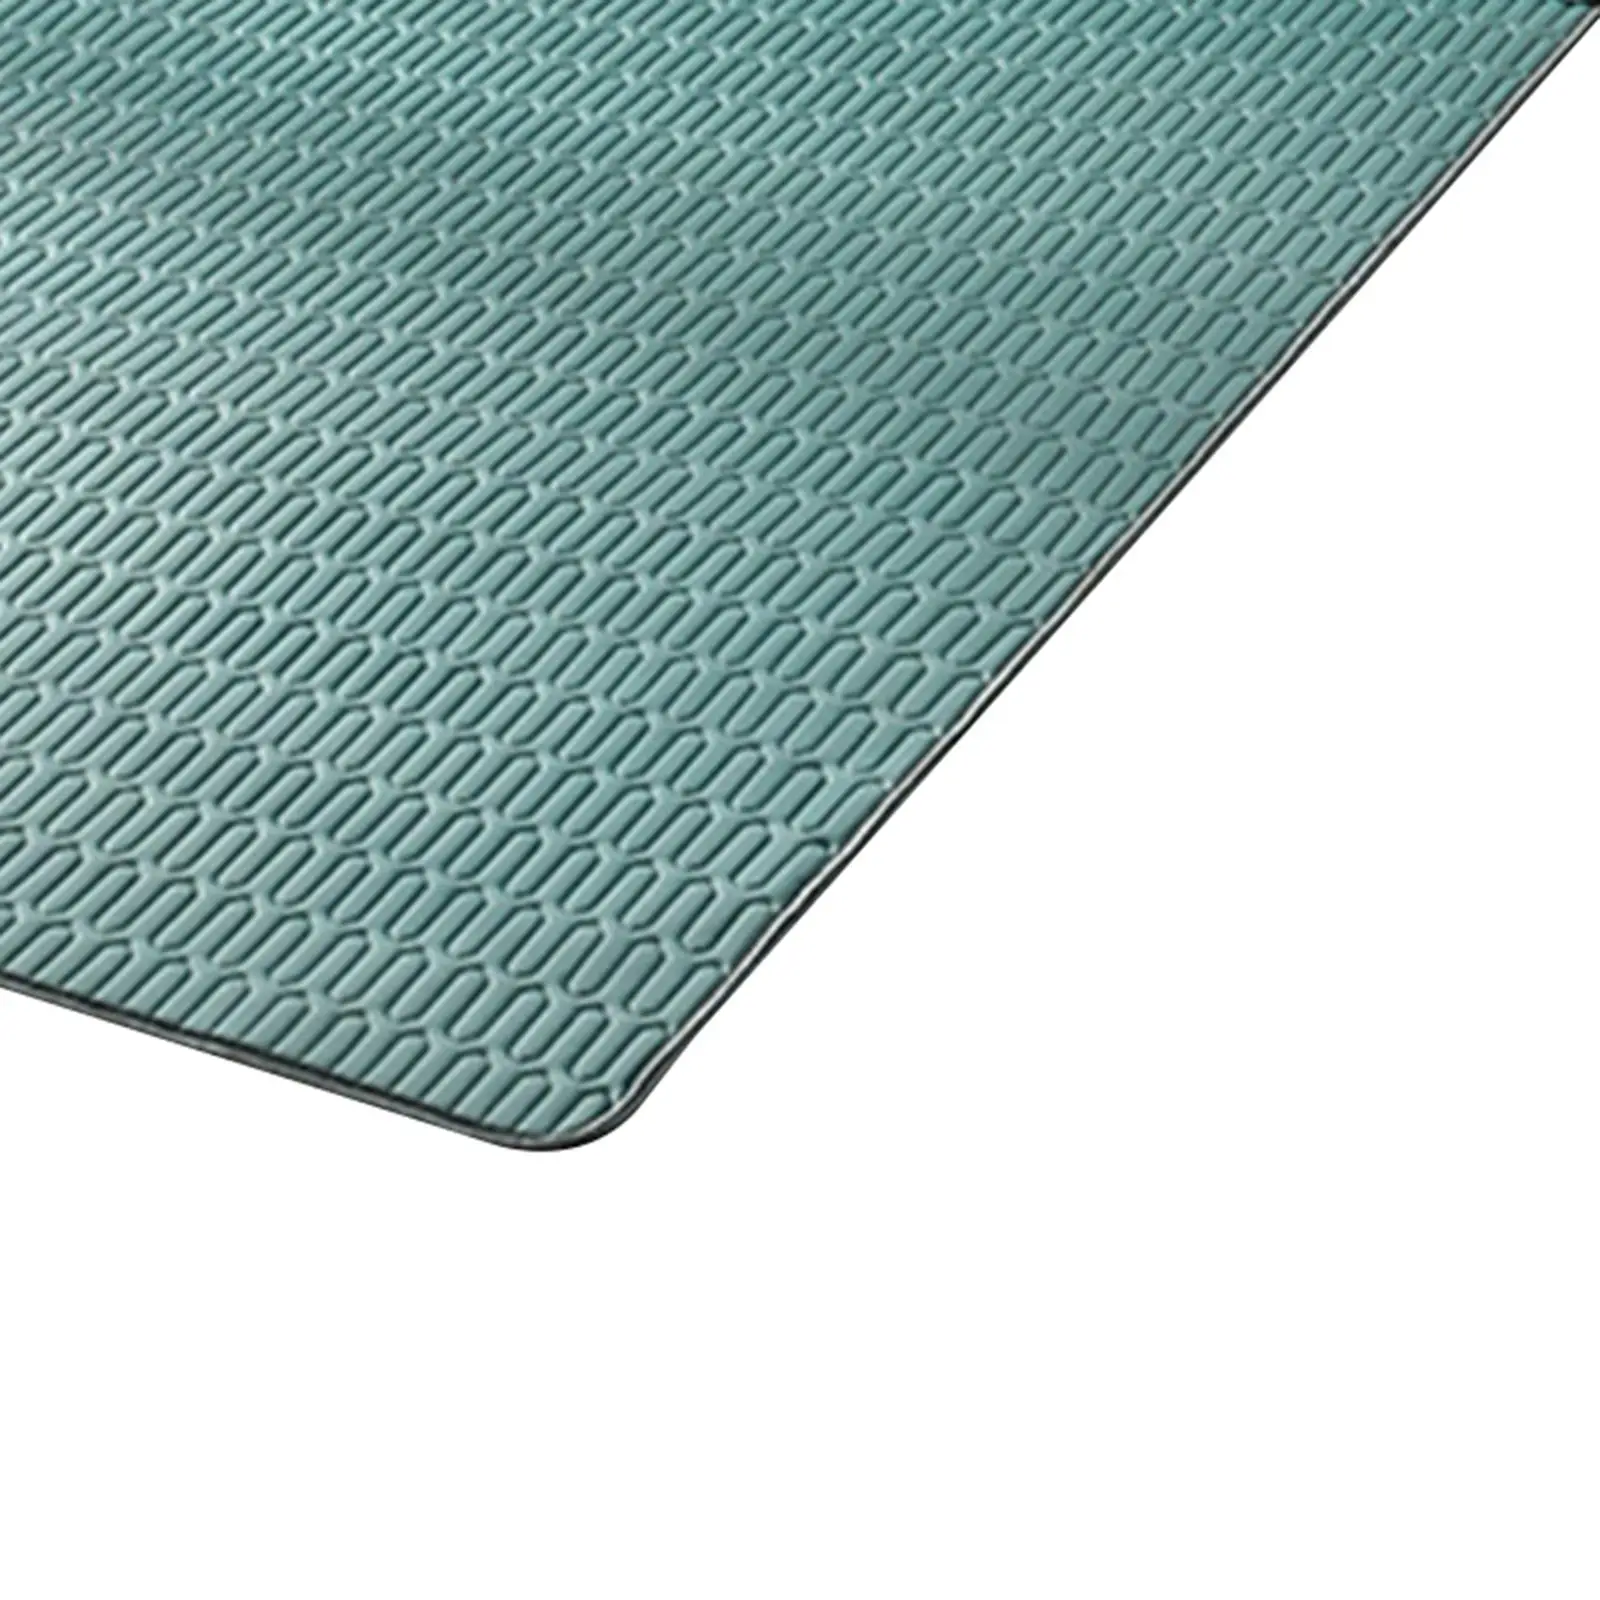 Natural Latex Mat Soft Pad Cooling Bed Cold Summer Mat Conditioning Pad Cooling Bed Sheet for Home Dormitory School